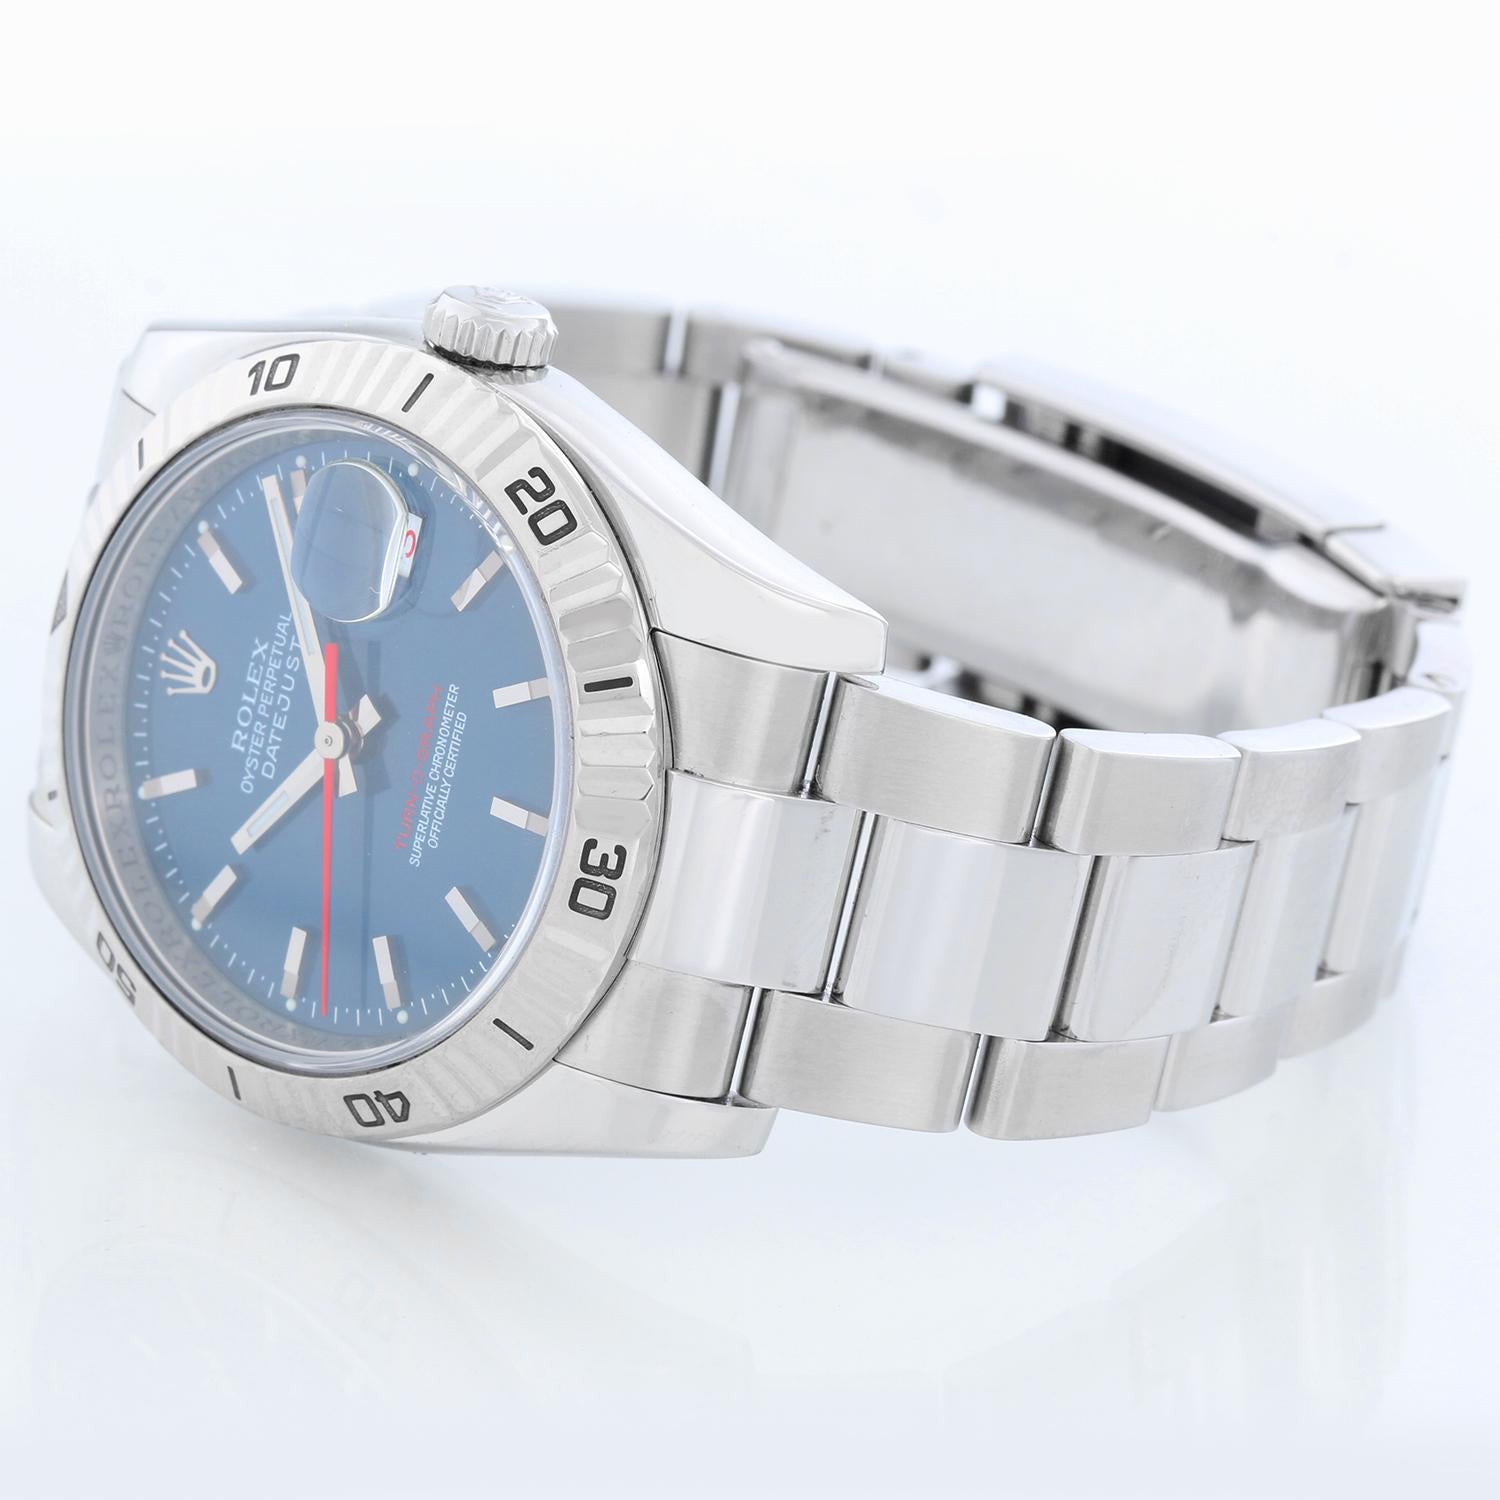 Men's Rolex Turnograph Datejust Stainless Steel Watch 116264 - Automatic winding, 31 jewel, sapphire crystal. Stainless steel case with 18k white gold Thunderbird bezel  (36mm diameter). Blue dial with stick markers; red date and second hand.